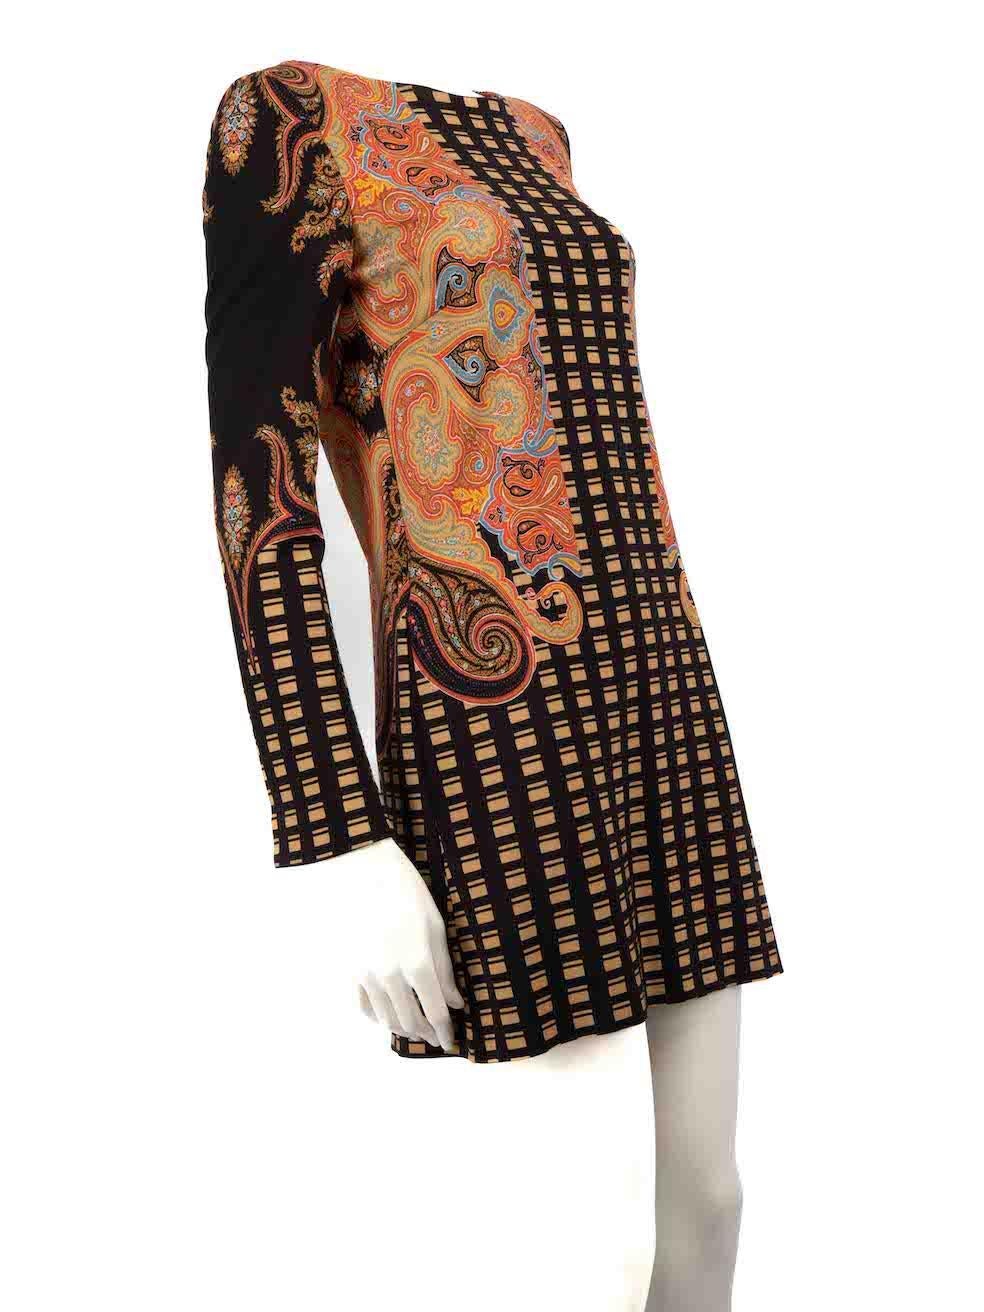 CONDITION is Very good. Minimal wear to dress is evident. Minimal wear to the front is seen with a discolouration mark on this used Etro designer resale item.
 
 
 
 Details
 
 
 Multicolour- brown and orange tone
 
 Viscose
 
 Dress
 
 Abstract